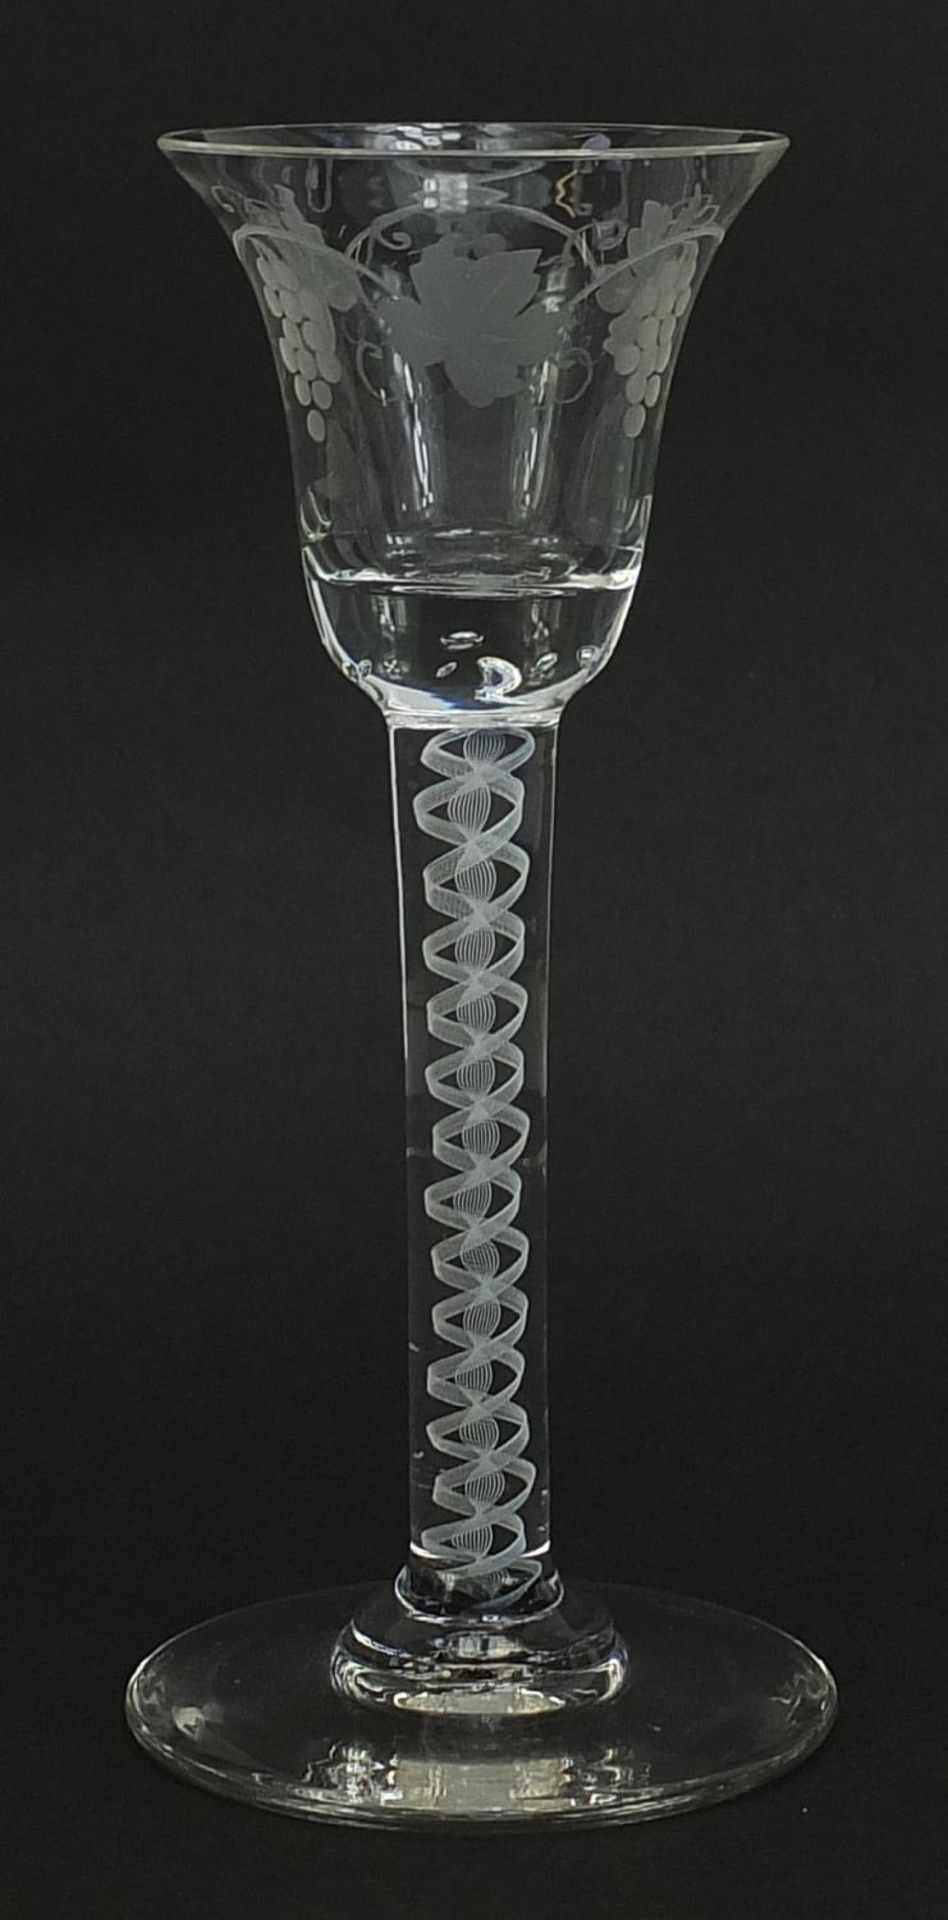 18th century style wine glass with air twist stem and etched bowl, 15.5cm high - Image 2 of 3